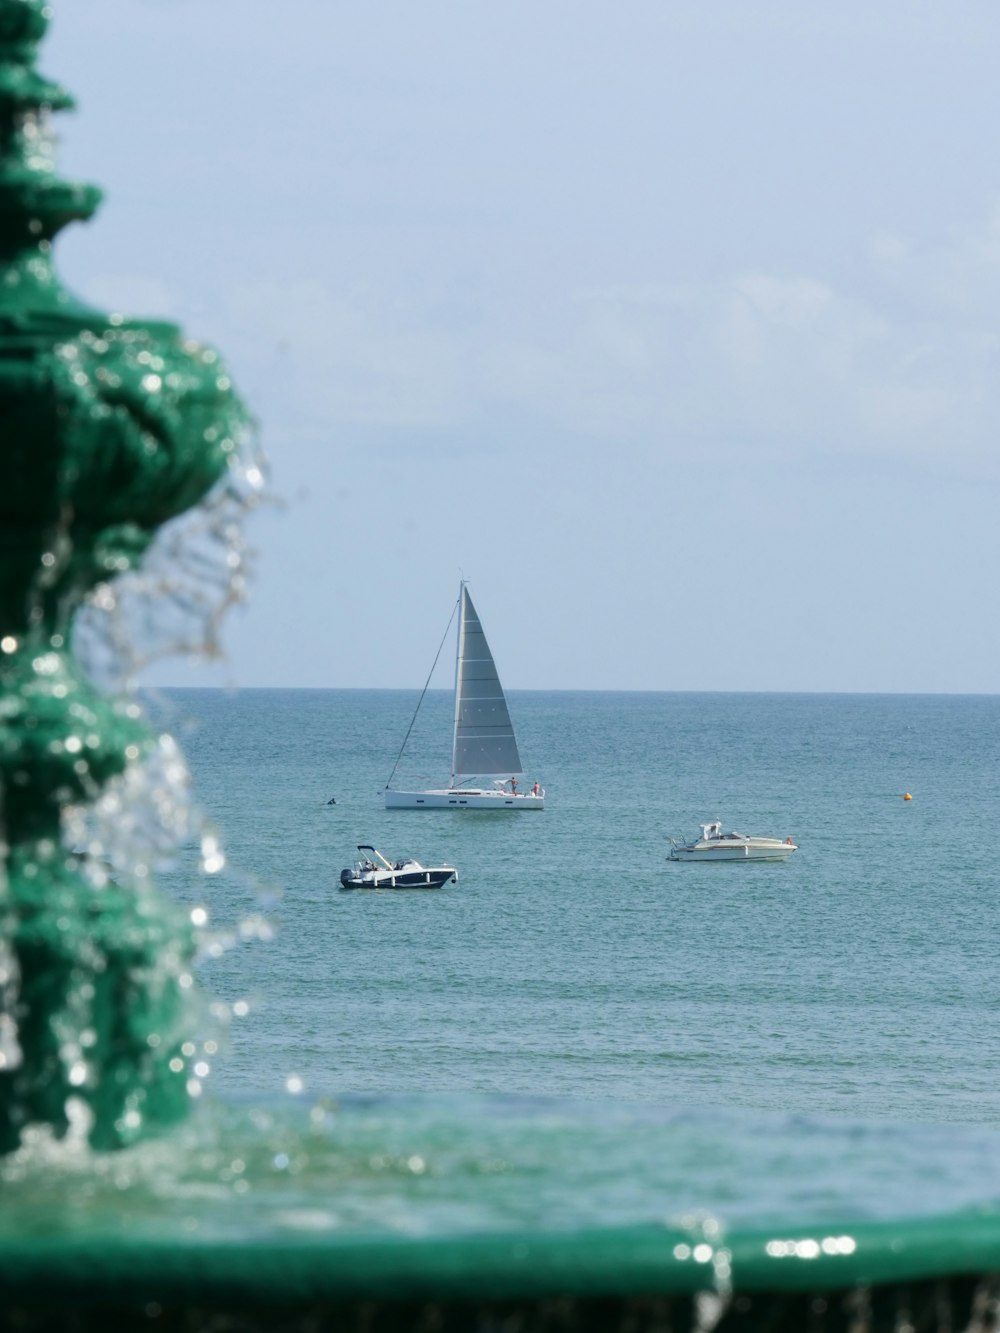 a view of a sailboat out on the water